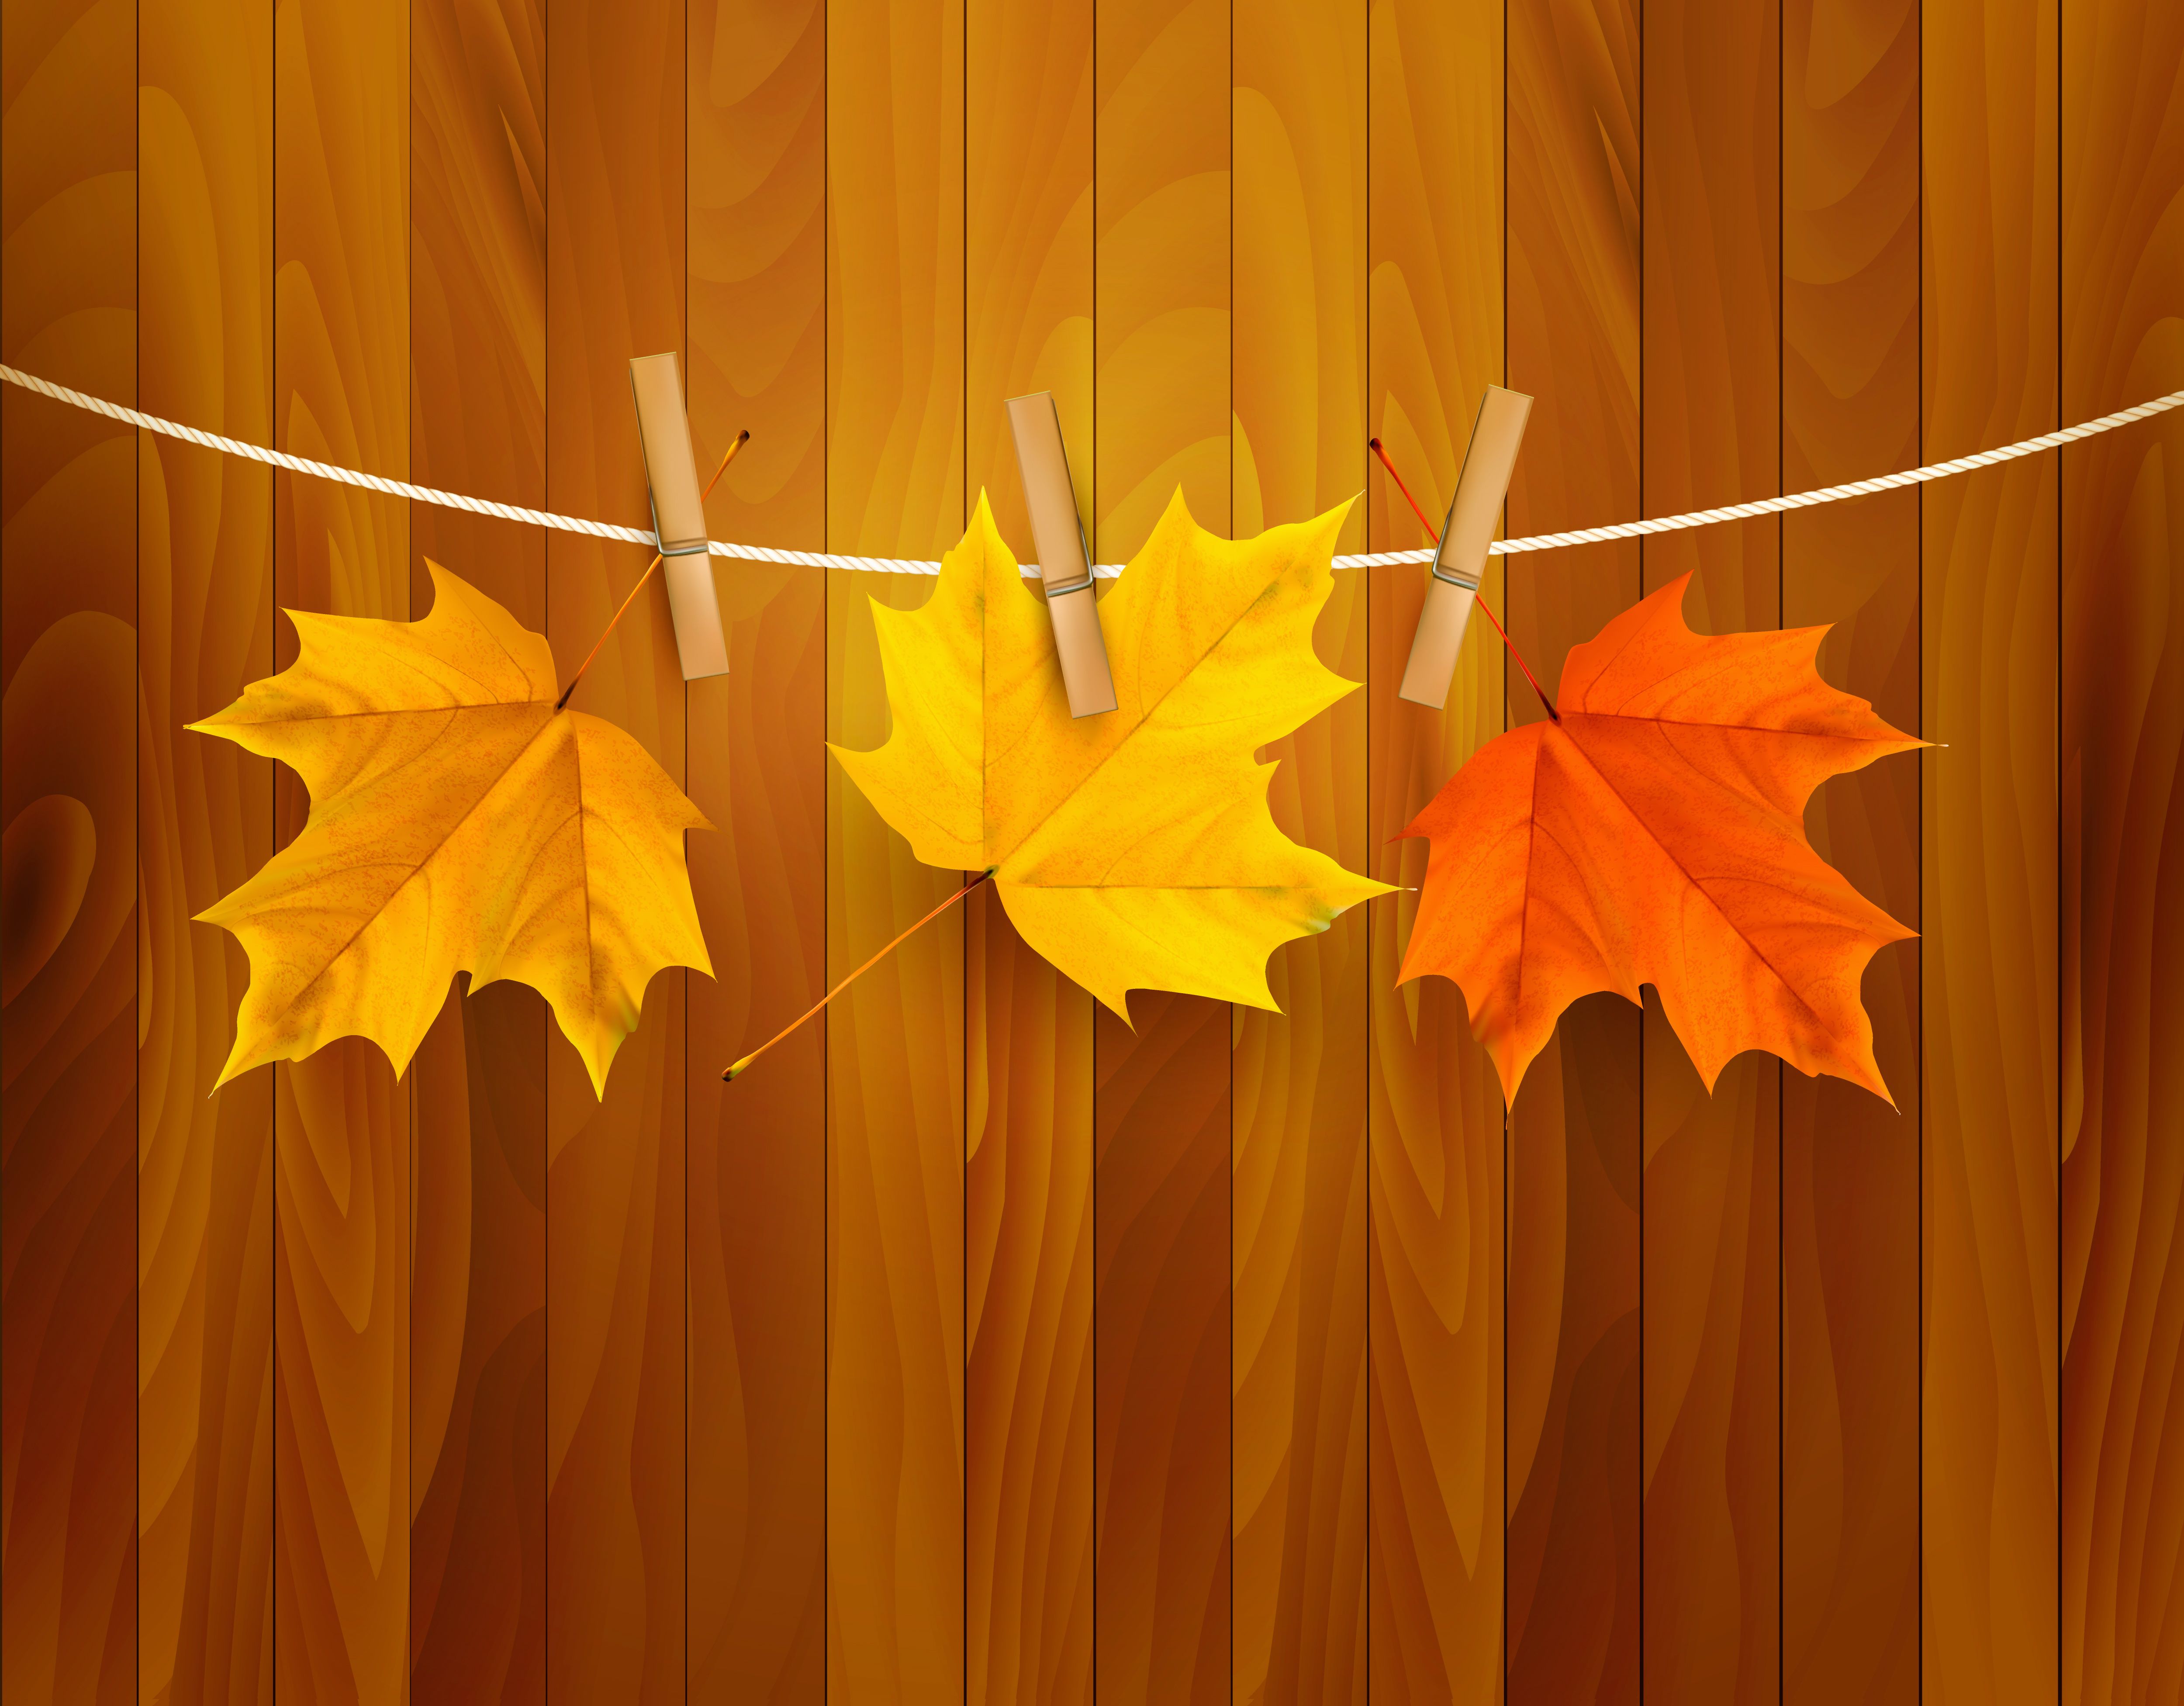 Tree Fall Leaves Background Quality Image And Transparent PNG Free Clipart